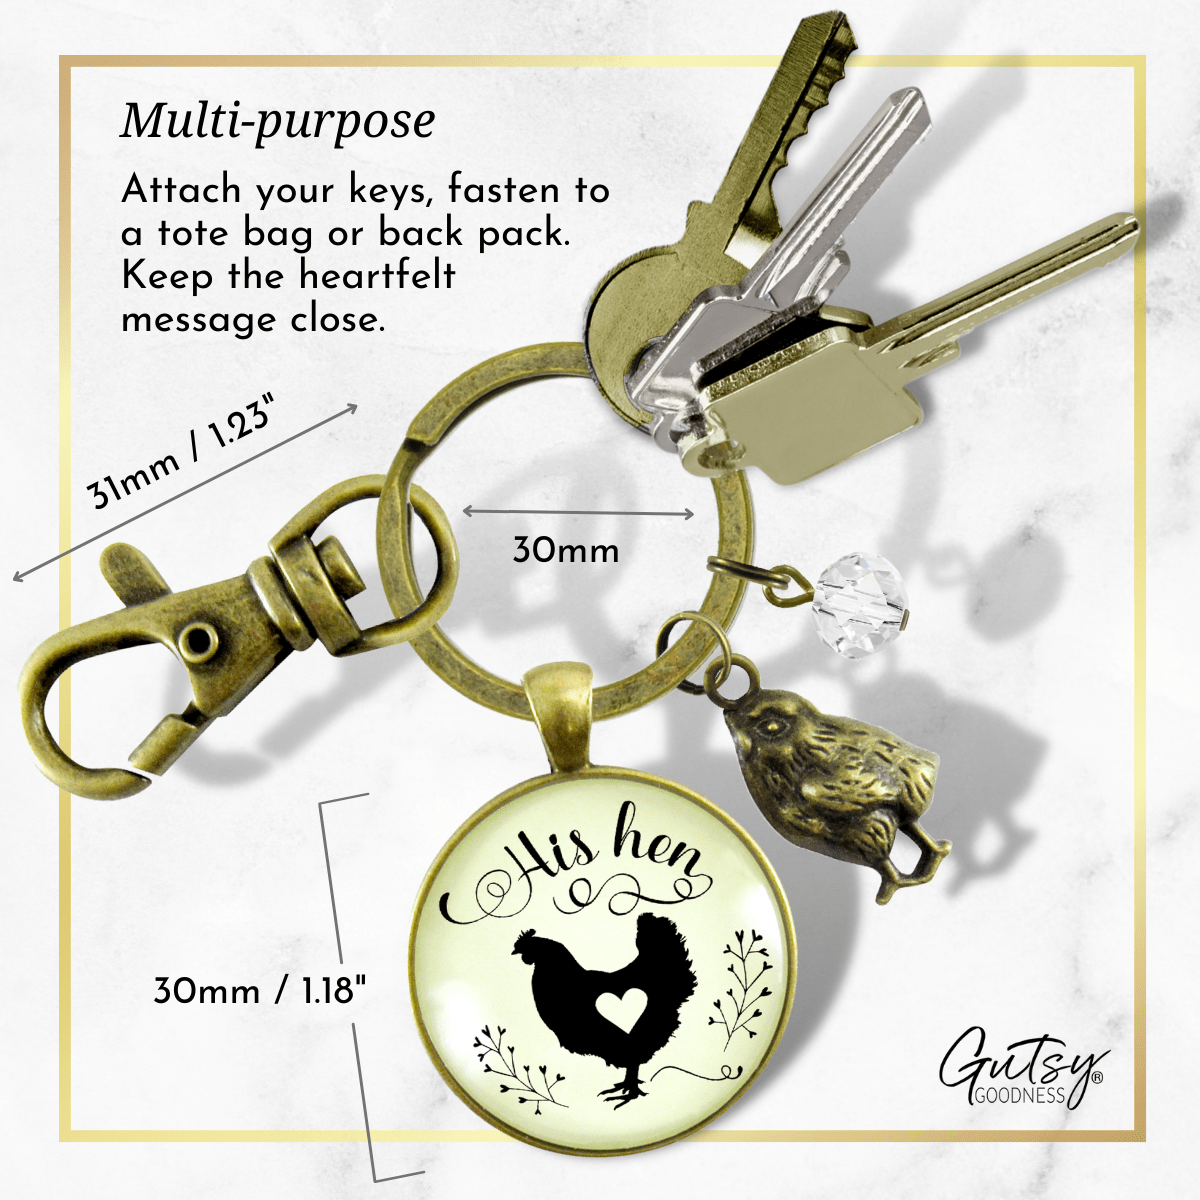 His Hen Keychain For Chicken Mom Vintage Inspired Jewlery - Gutsy Goodness Handmade Jewelry;His Hen Keychain For Chicken Mom Vintage Inspired Jewlery - Gutsy Goodness Handmade Jewelry Gifts